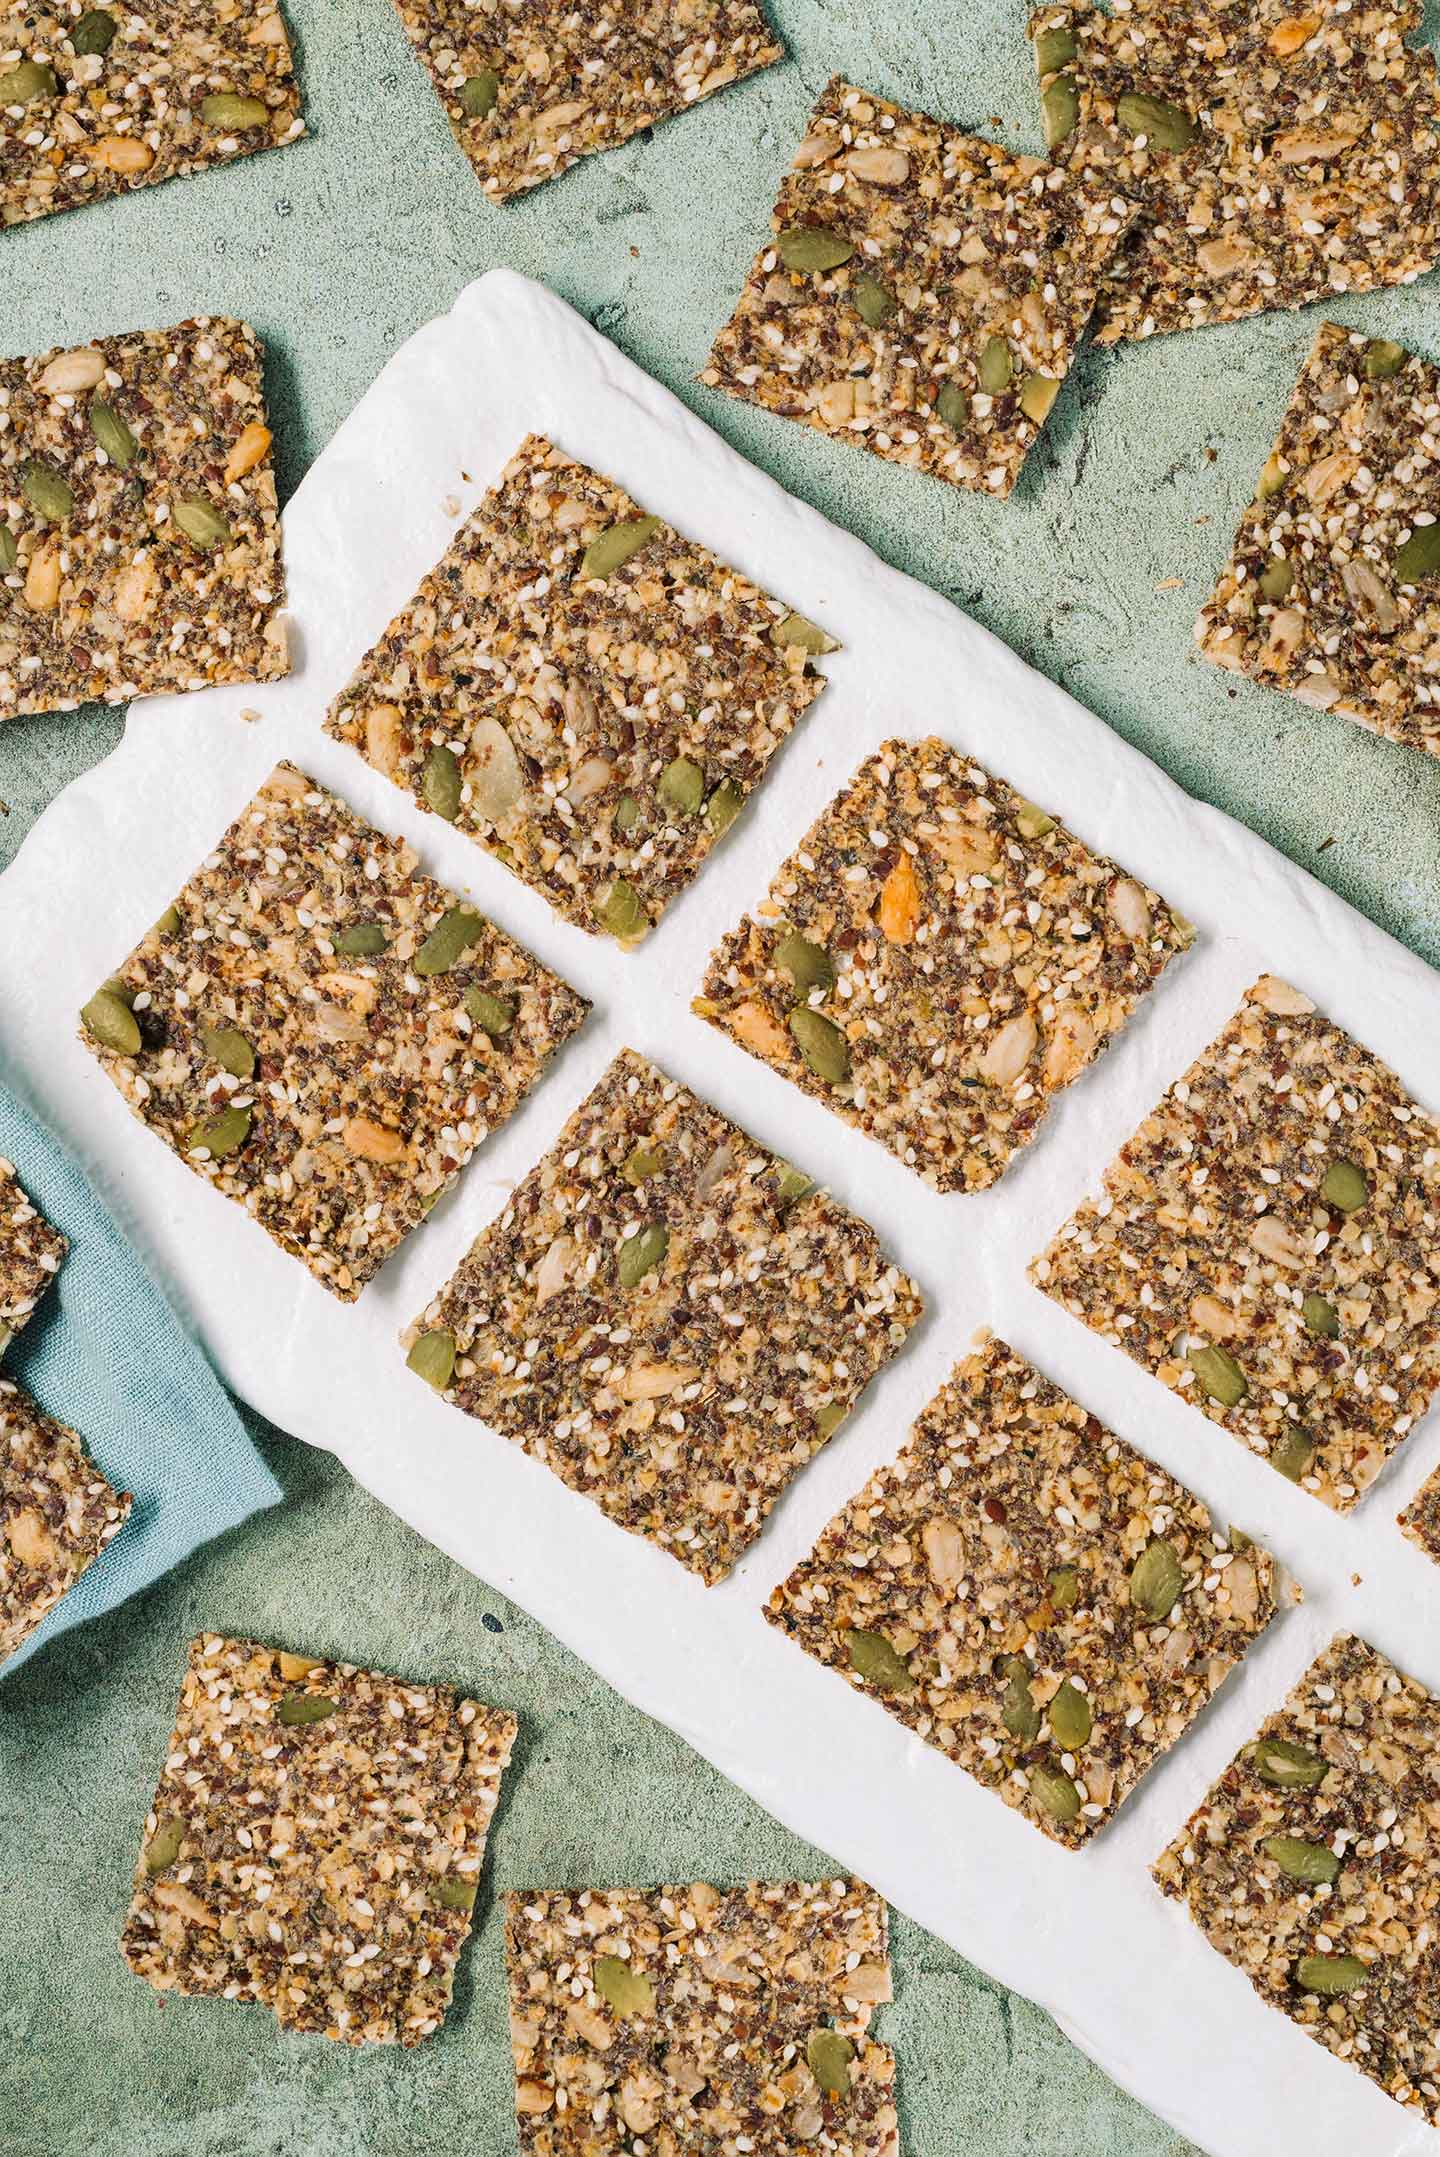 Top down view of gluten-free seed crackers arranged on a white tray. The square crackers look thin and crispy.